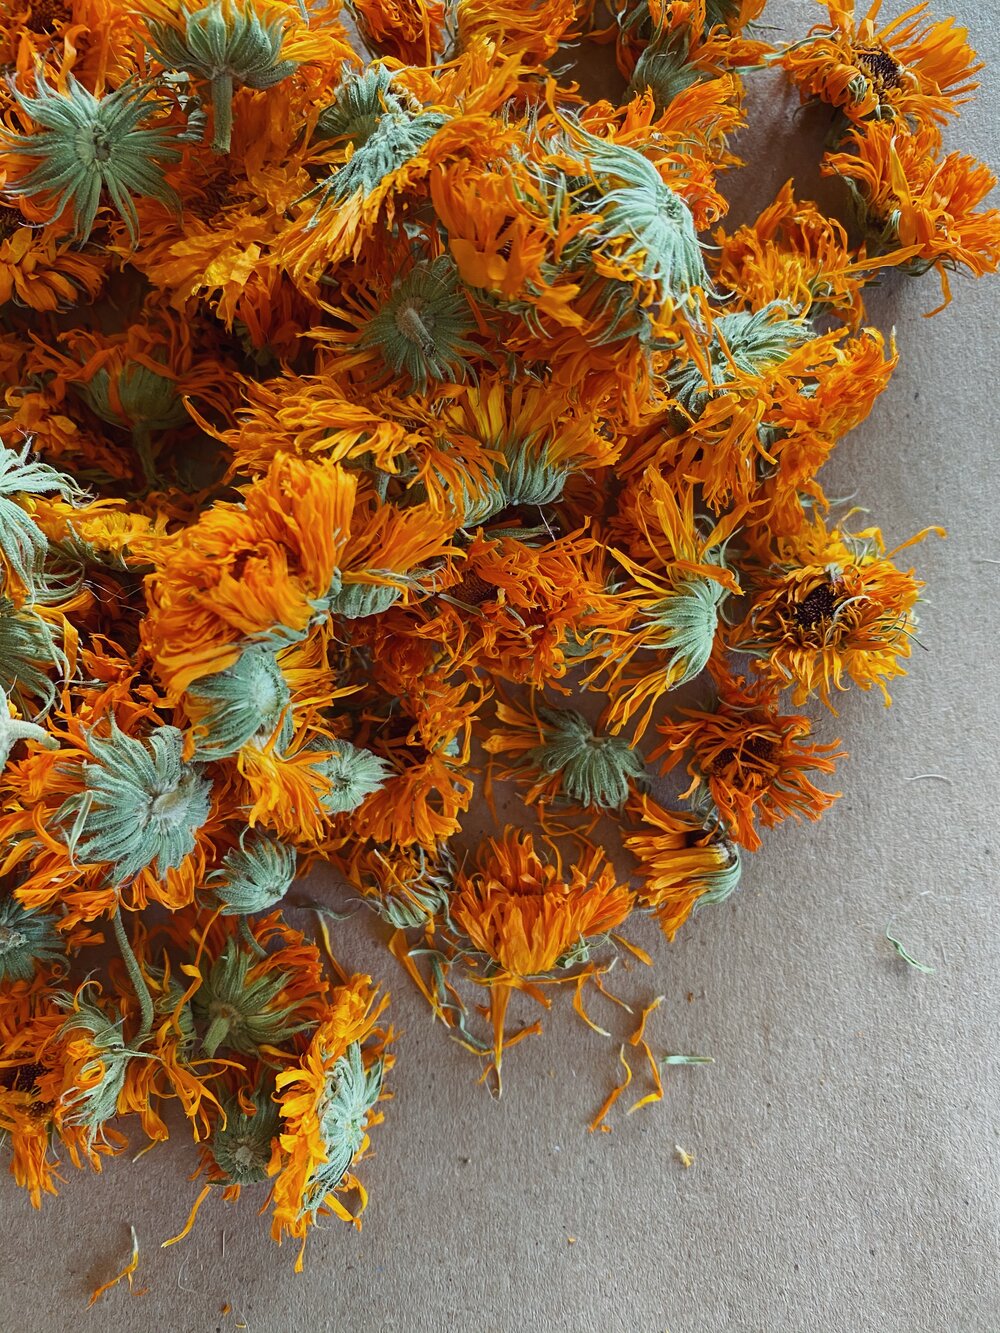 CALENDULA FLOWERS — Flower Power ❀ Herbs & Roots ❀ EAST VILLAGE NYC ❀ Open  12 - 7pm Daily